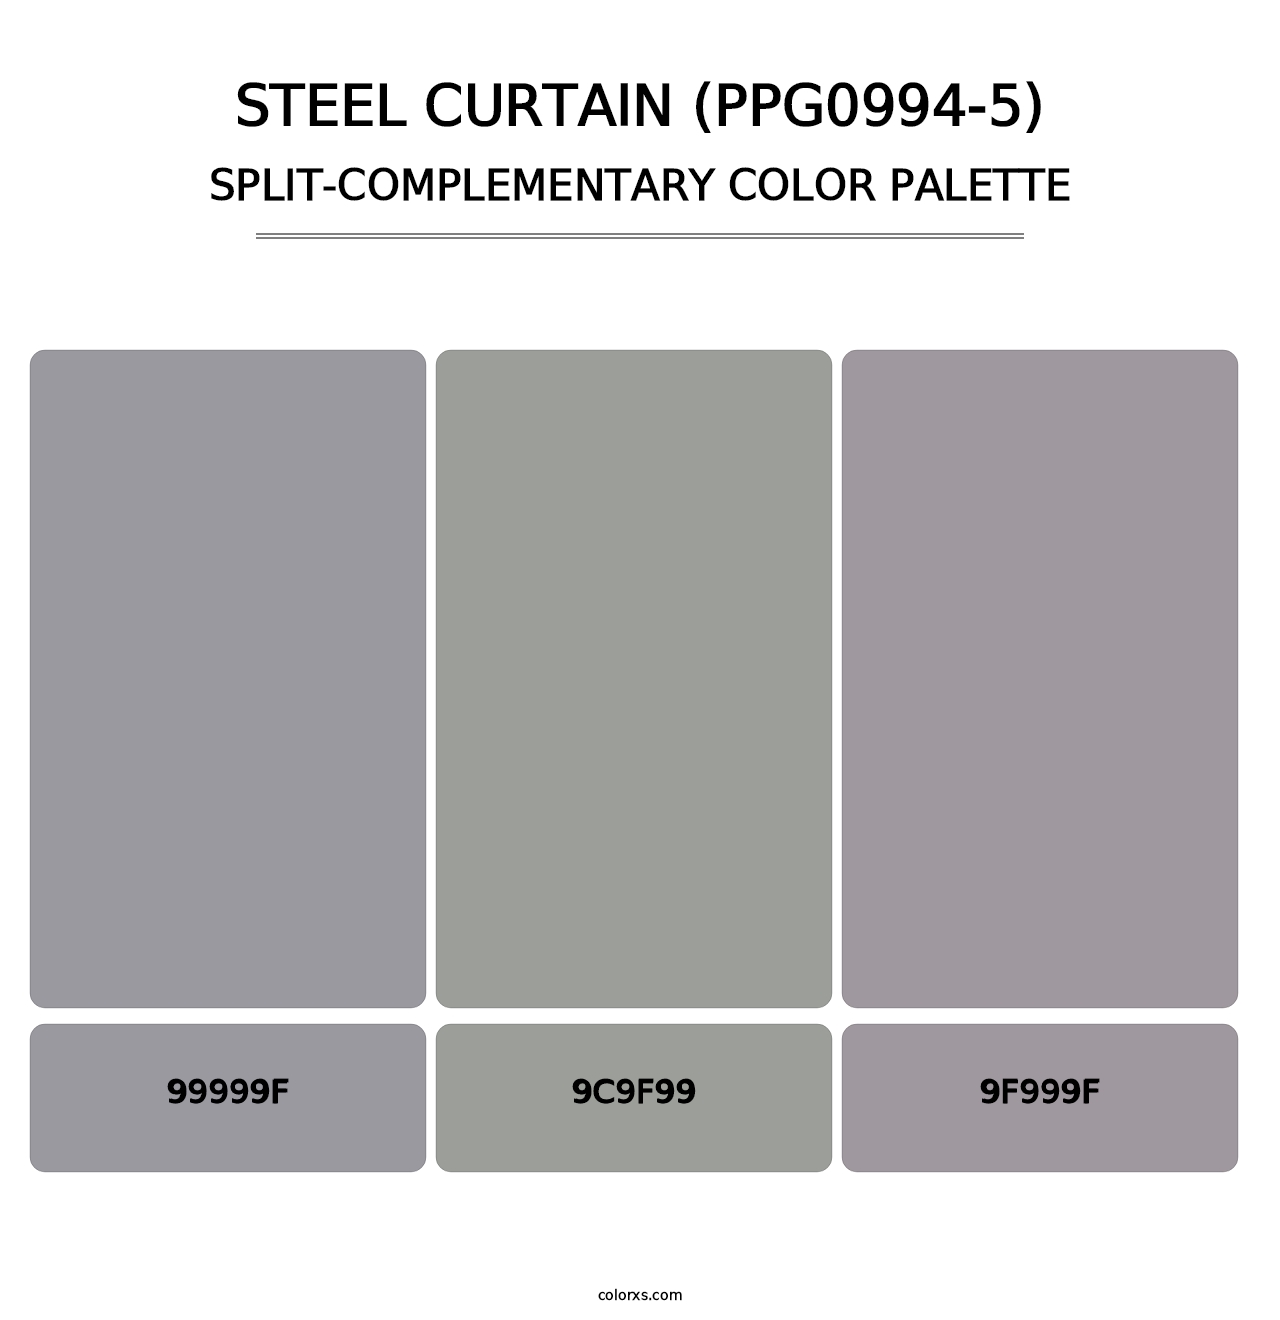 Steel Curtain (PPG0994-5) - Split-Complementary Color Palette